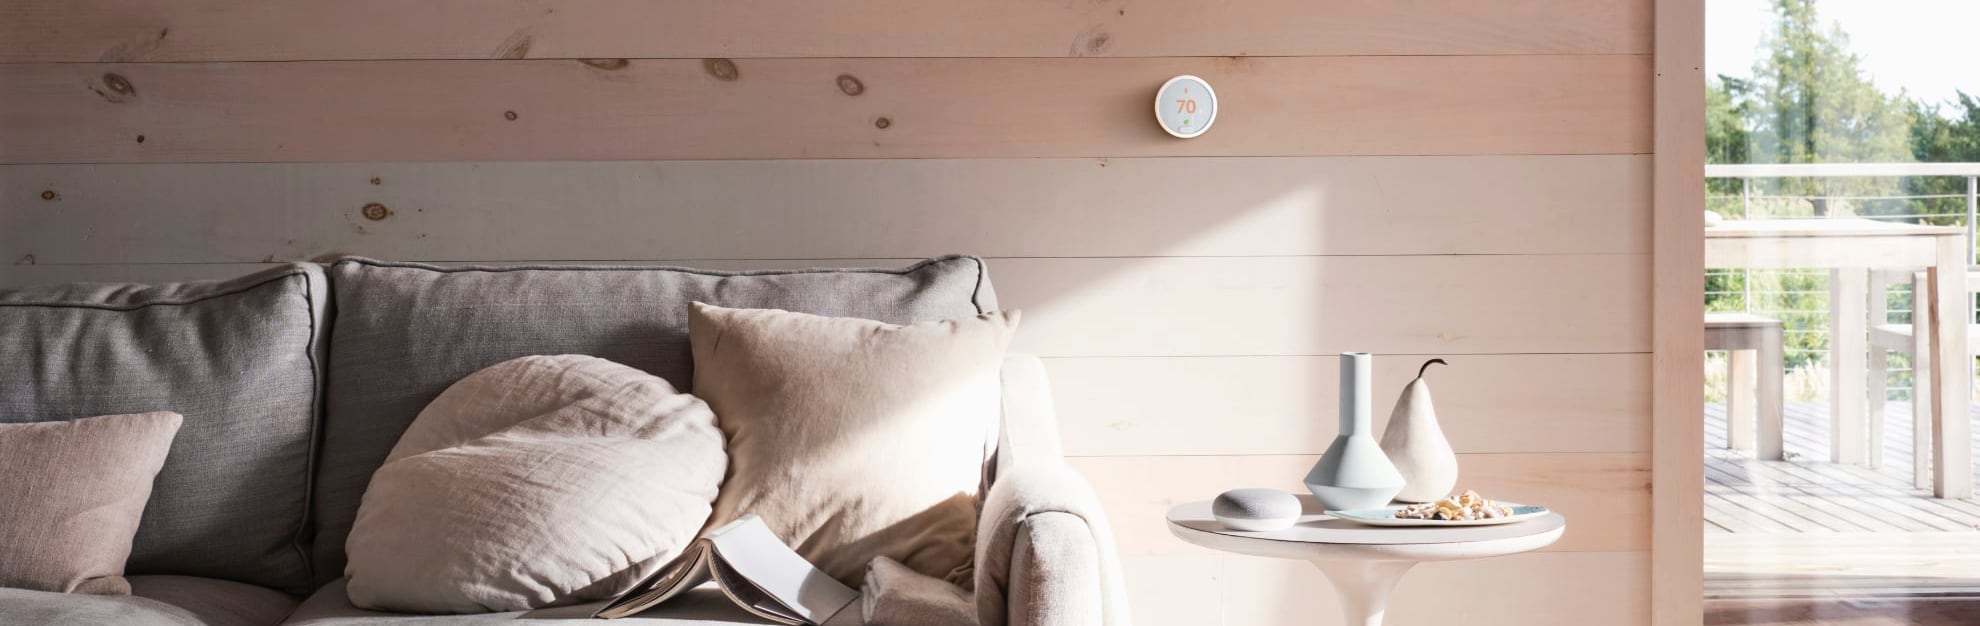 Vivint Home Automation in Camden